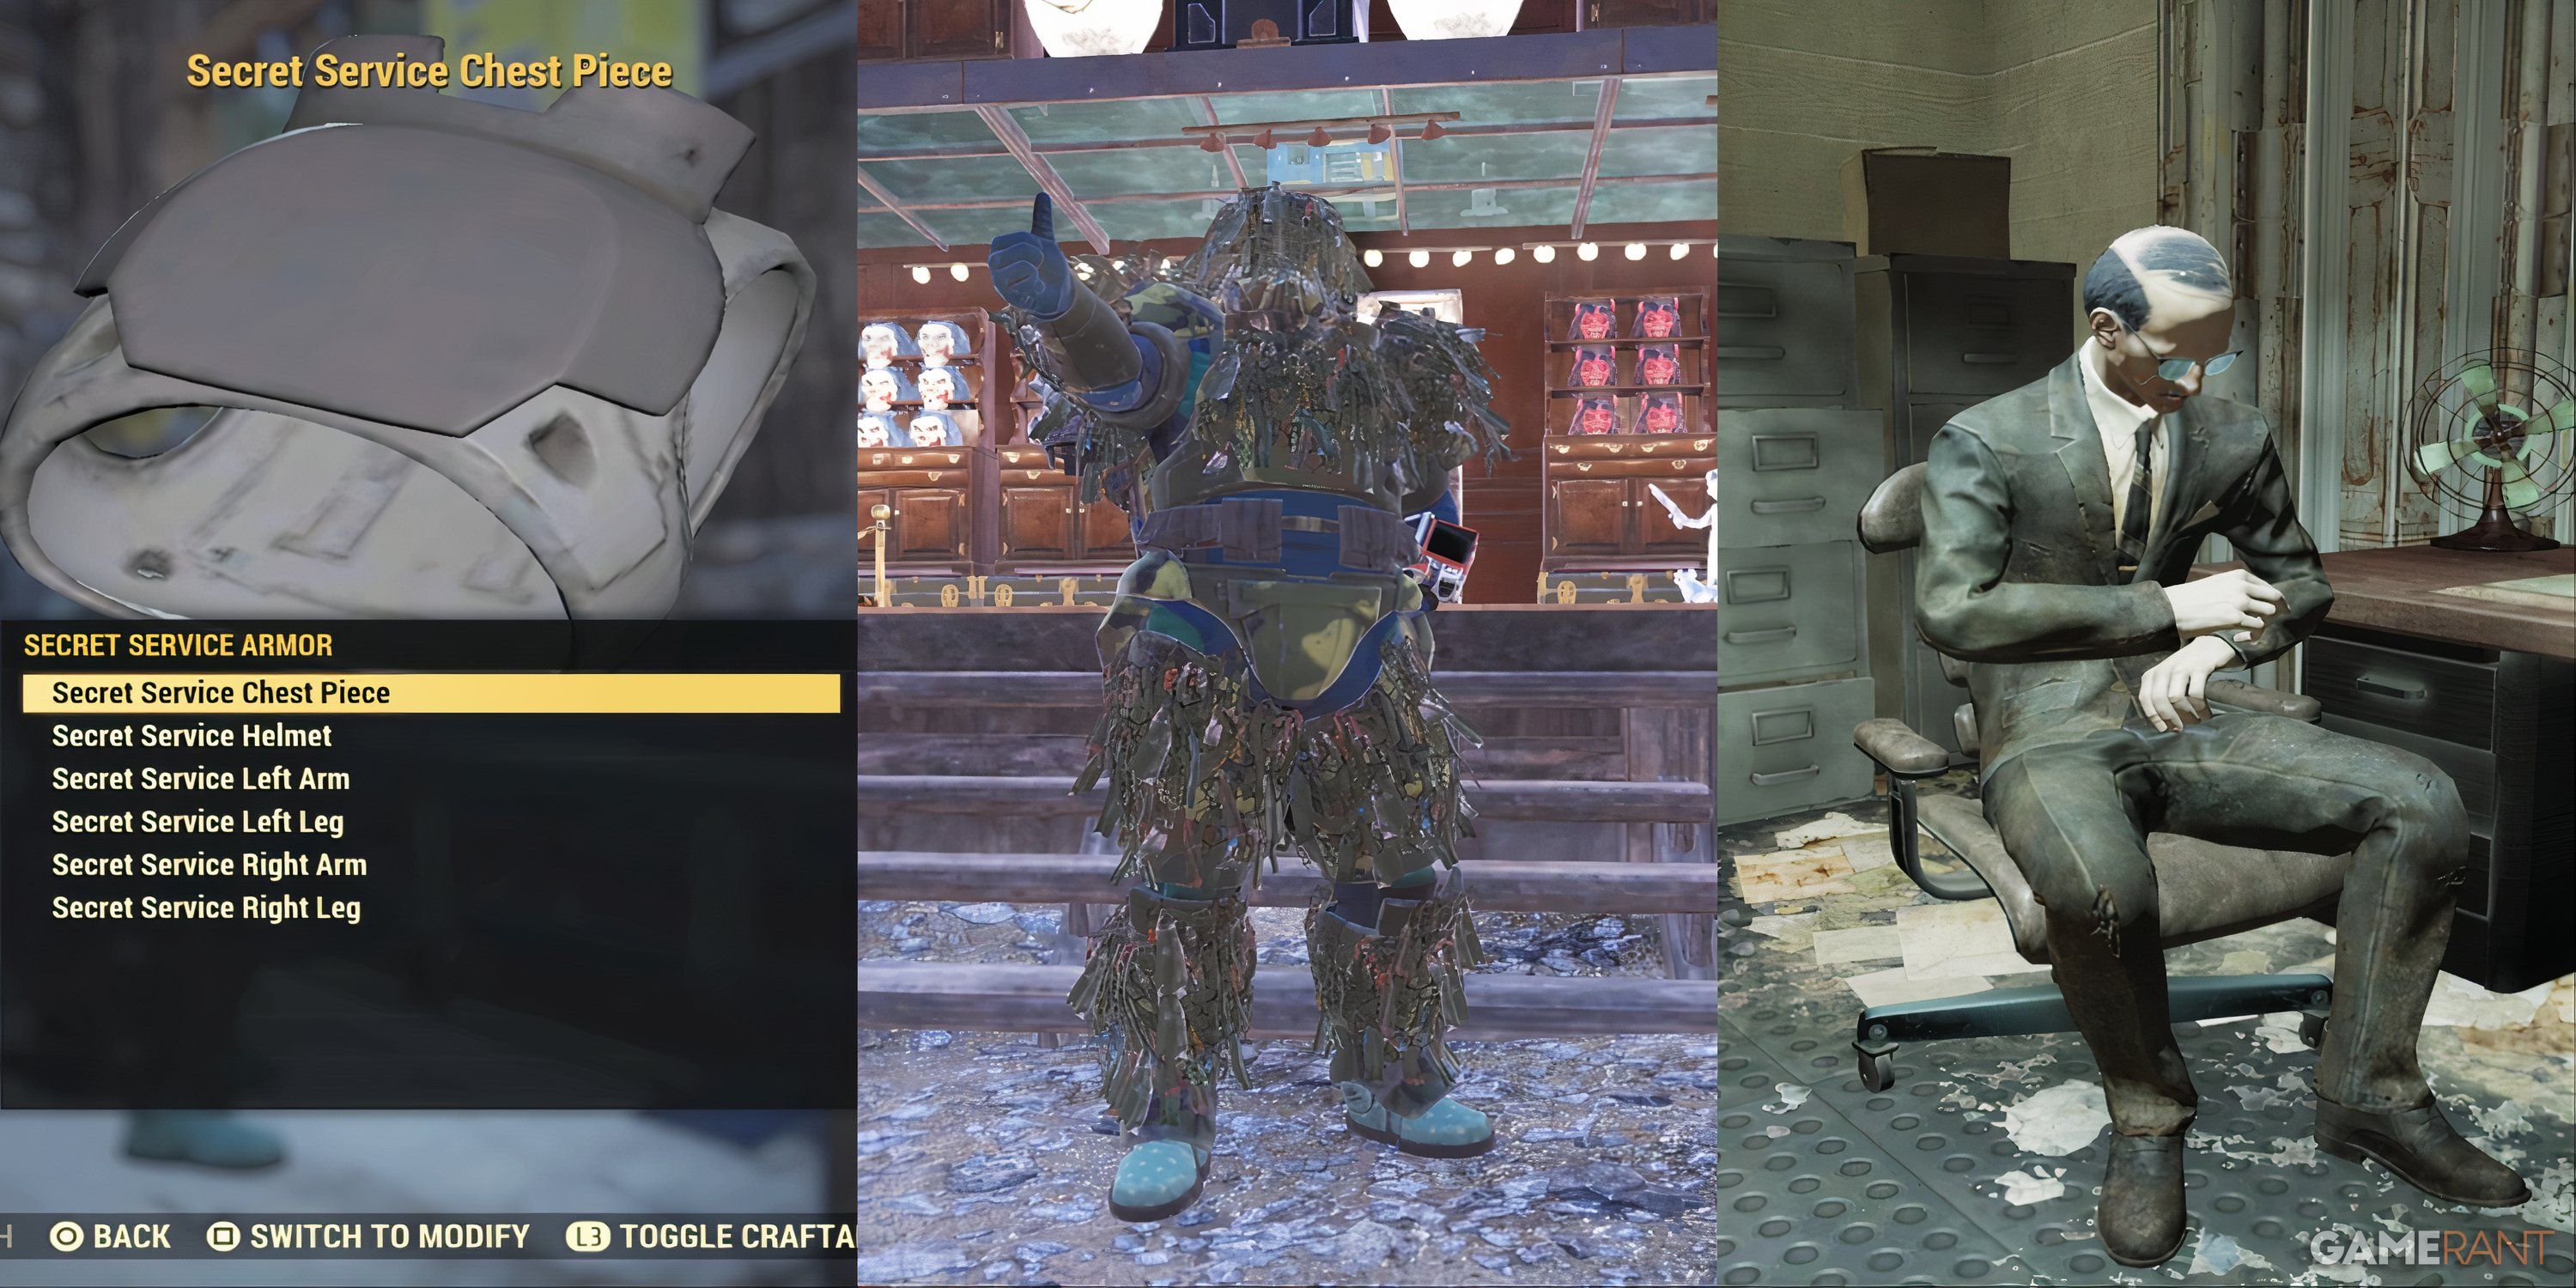 Secret Service Armor Uses in Fallout 76